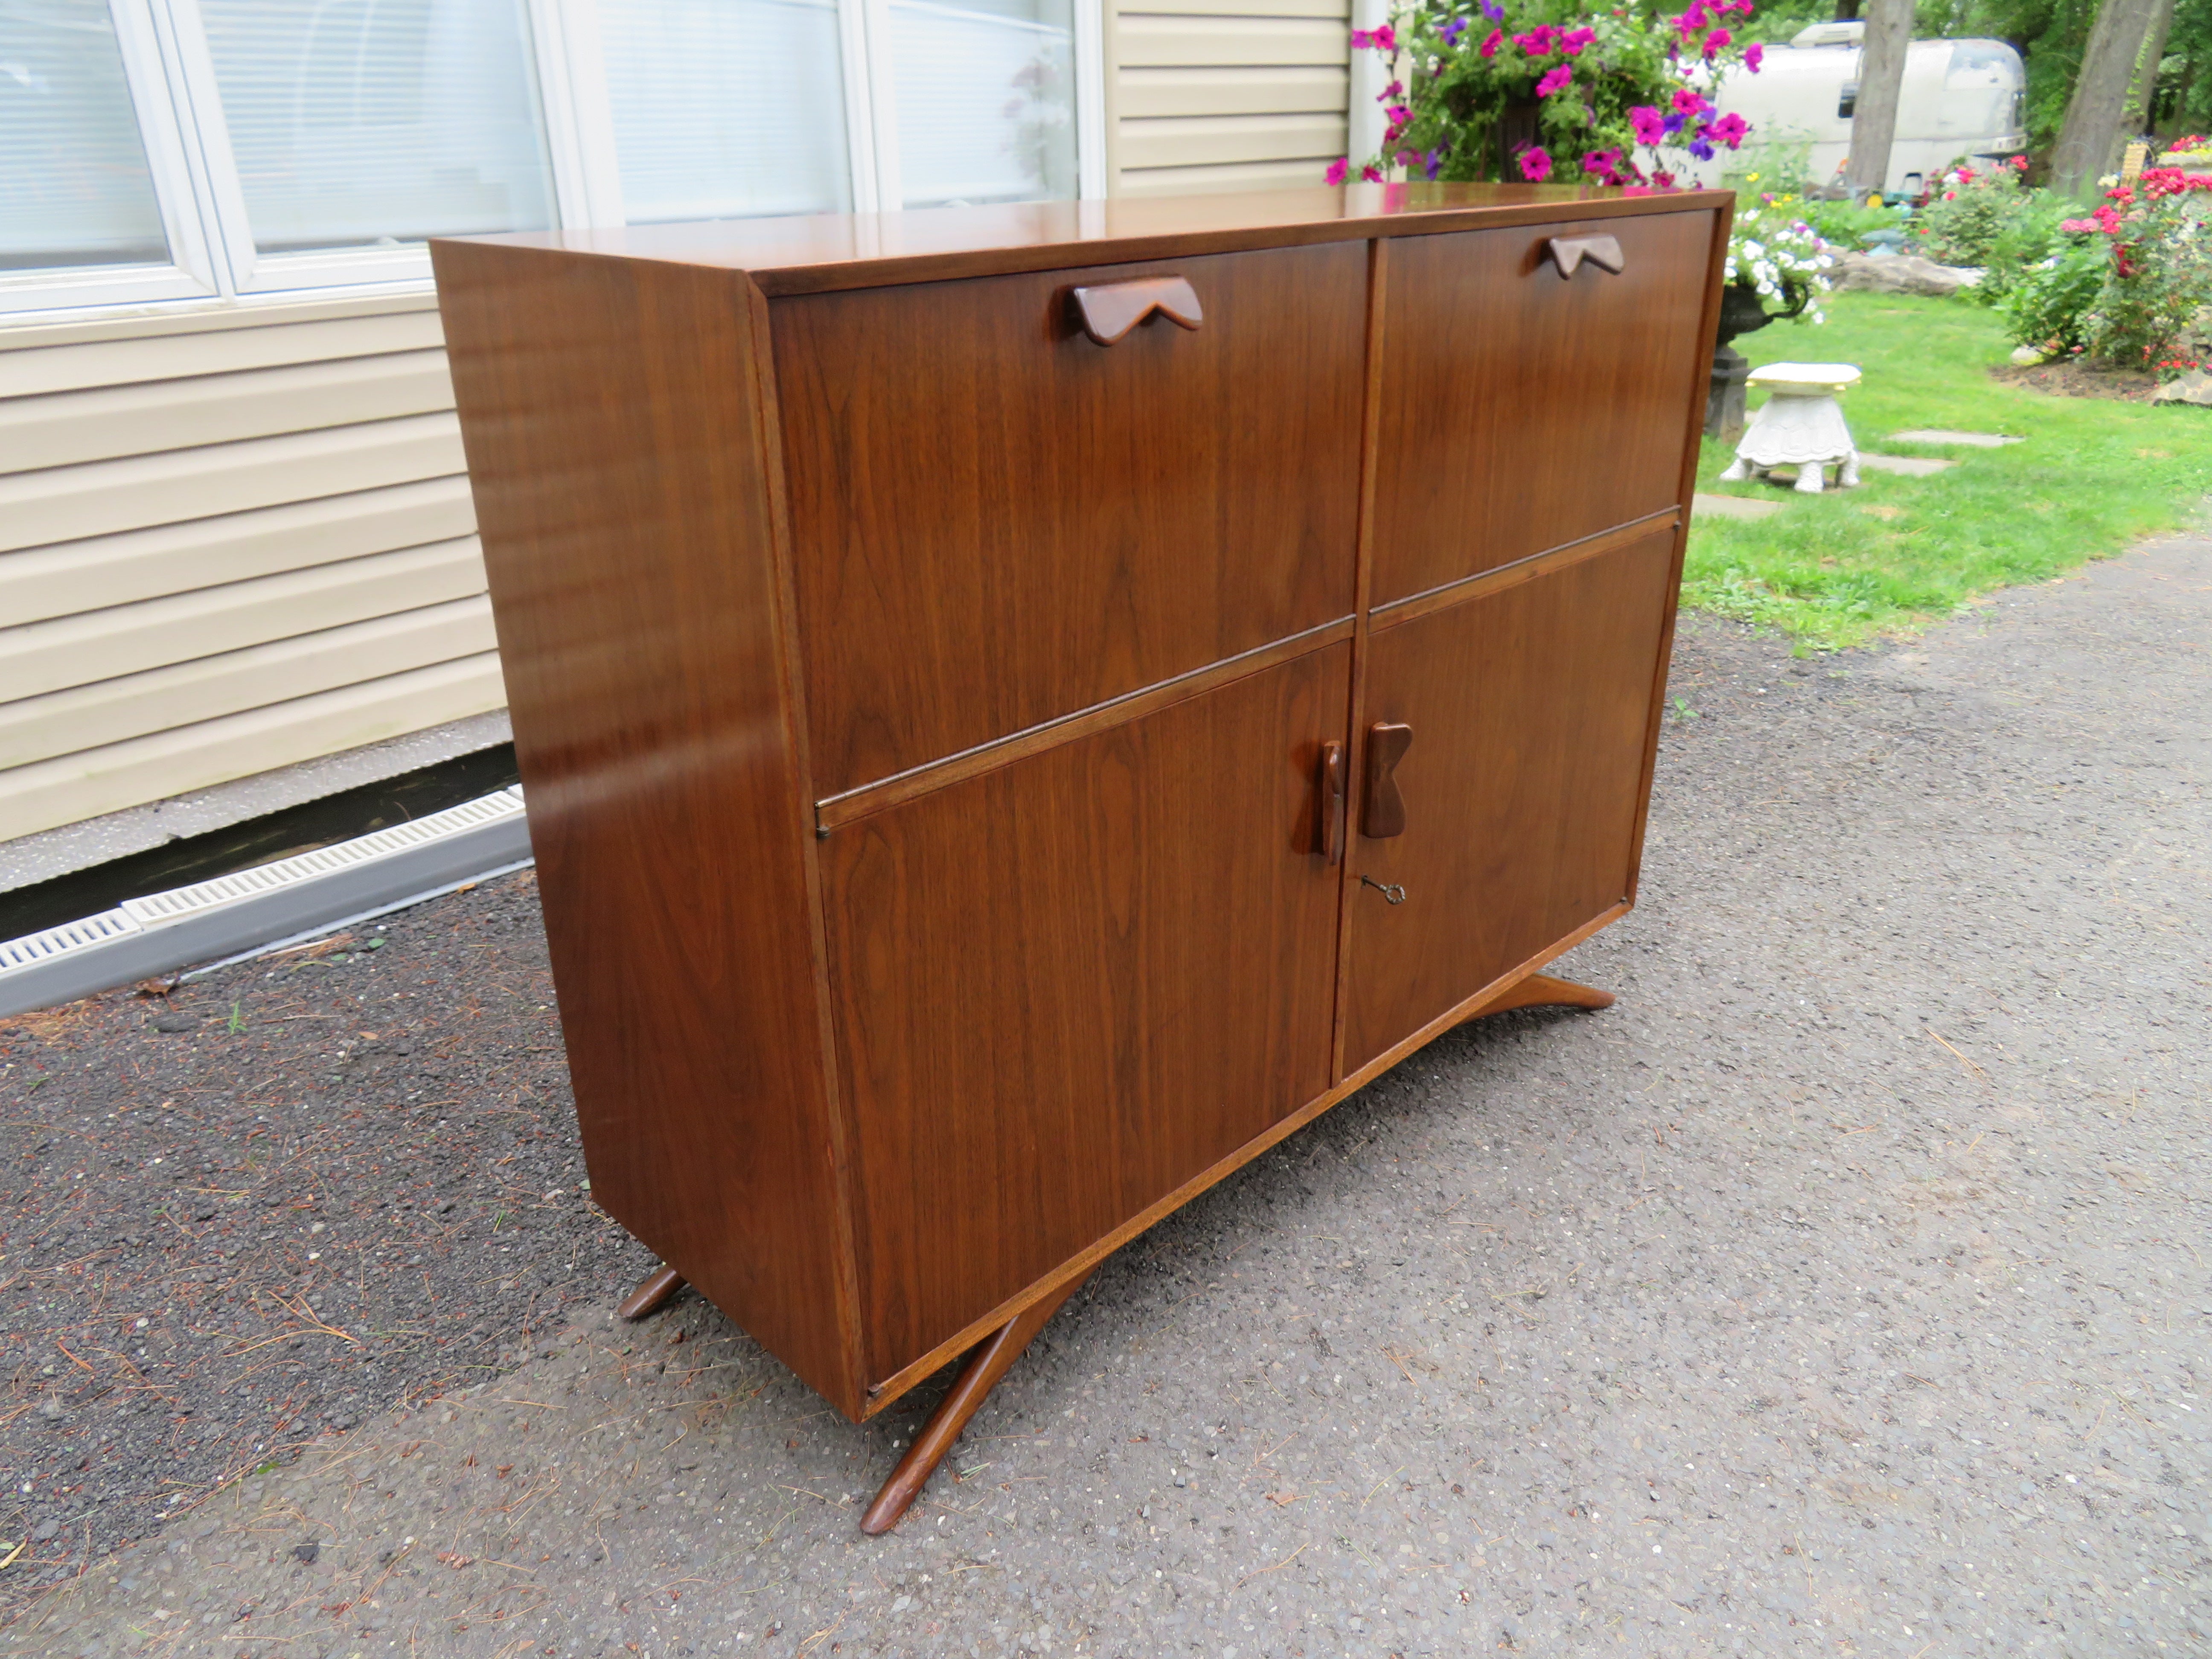 Fabulous Grosfeld House style walnut splayed legs bar cabinet. We love everything about this wonderful cabinet with the 2 pull-down doors revealing cubbies on one side and open space on the other. The bottom doors swing open to reveal a large open